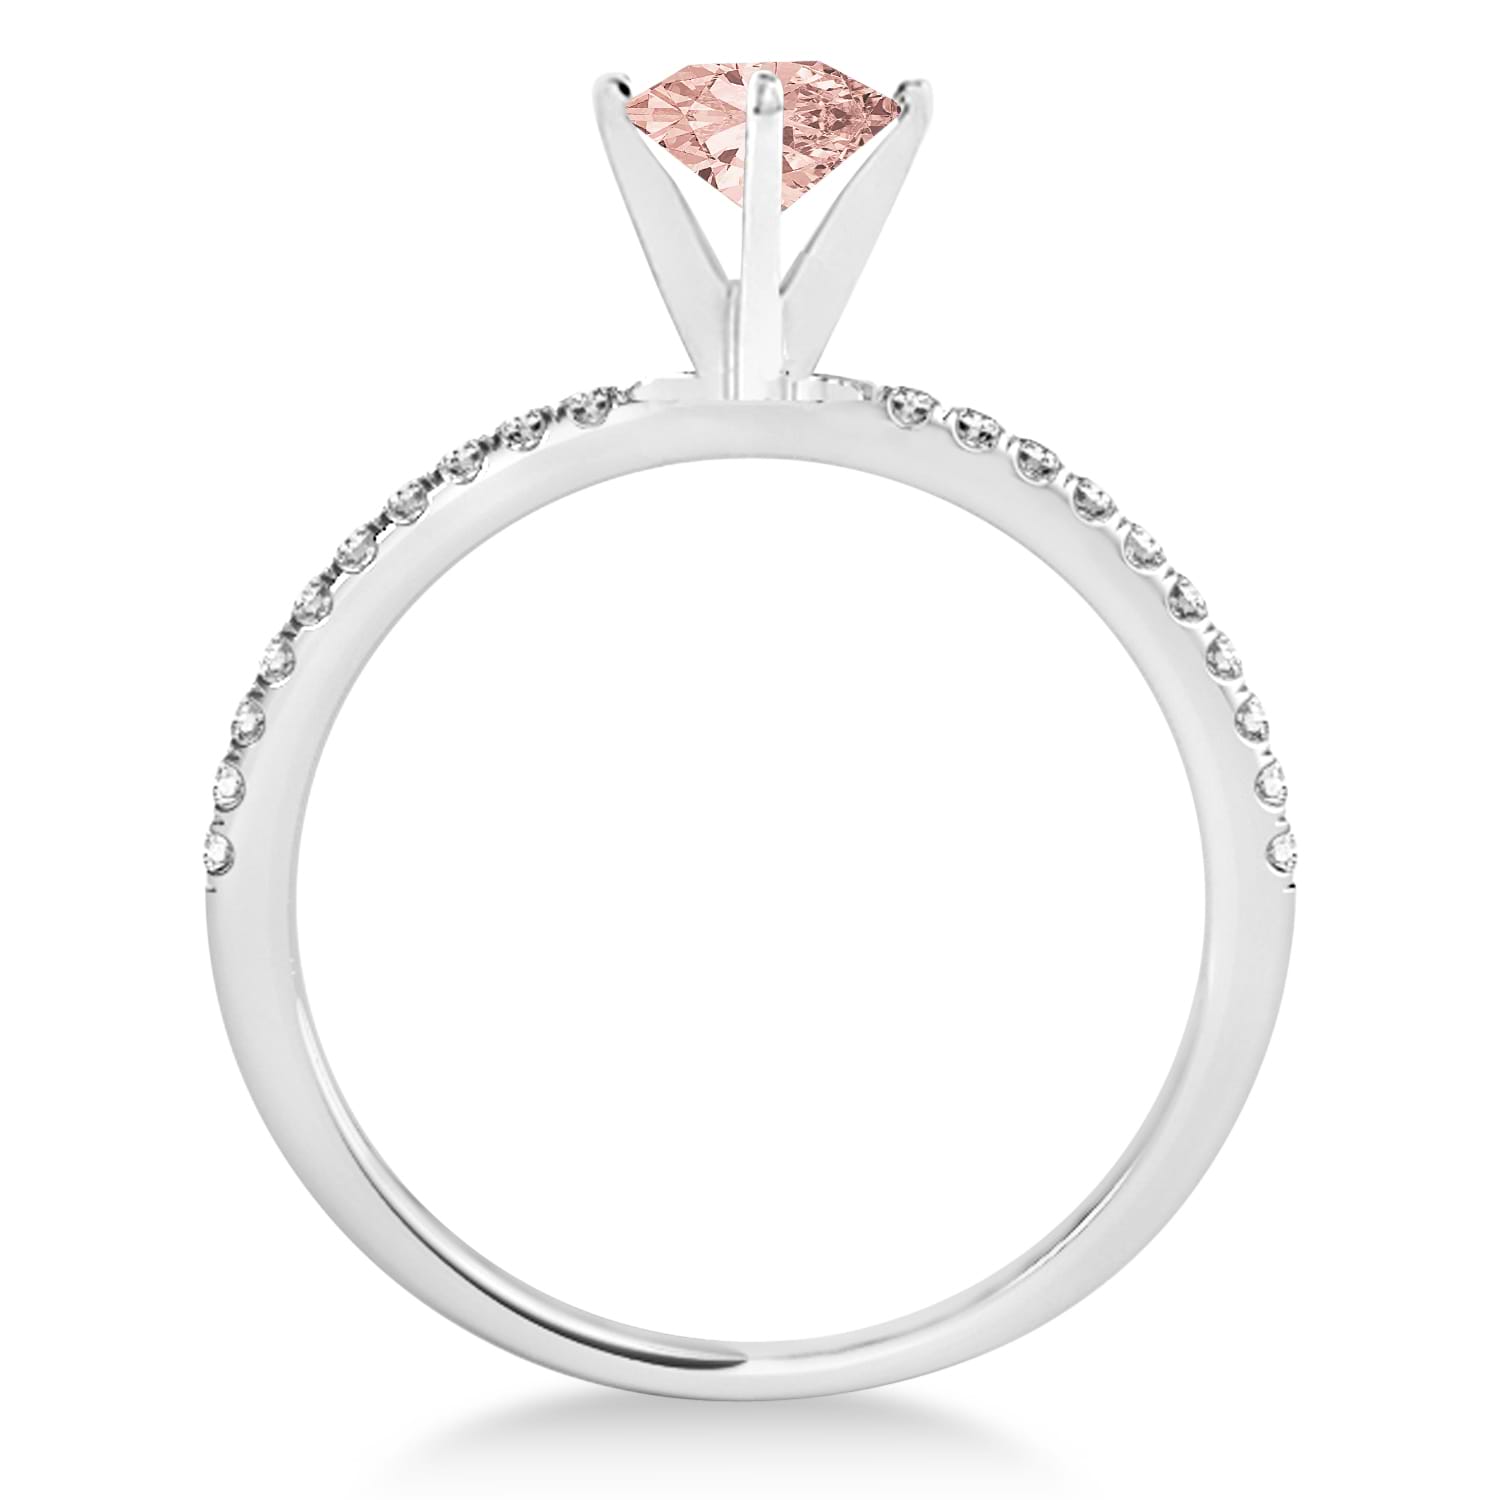 Morganite & Diamond Accented Oval Shape Engagement Ring 18k White Gold (2.00ct)